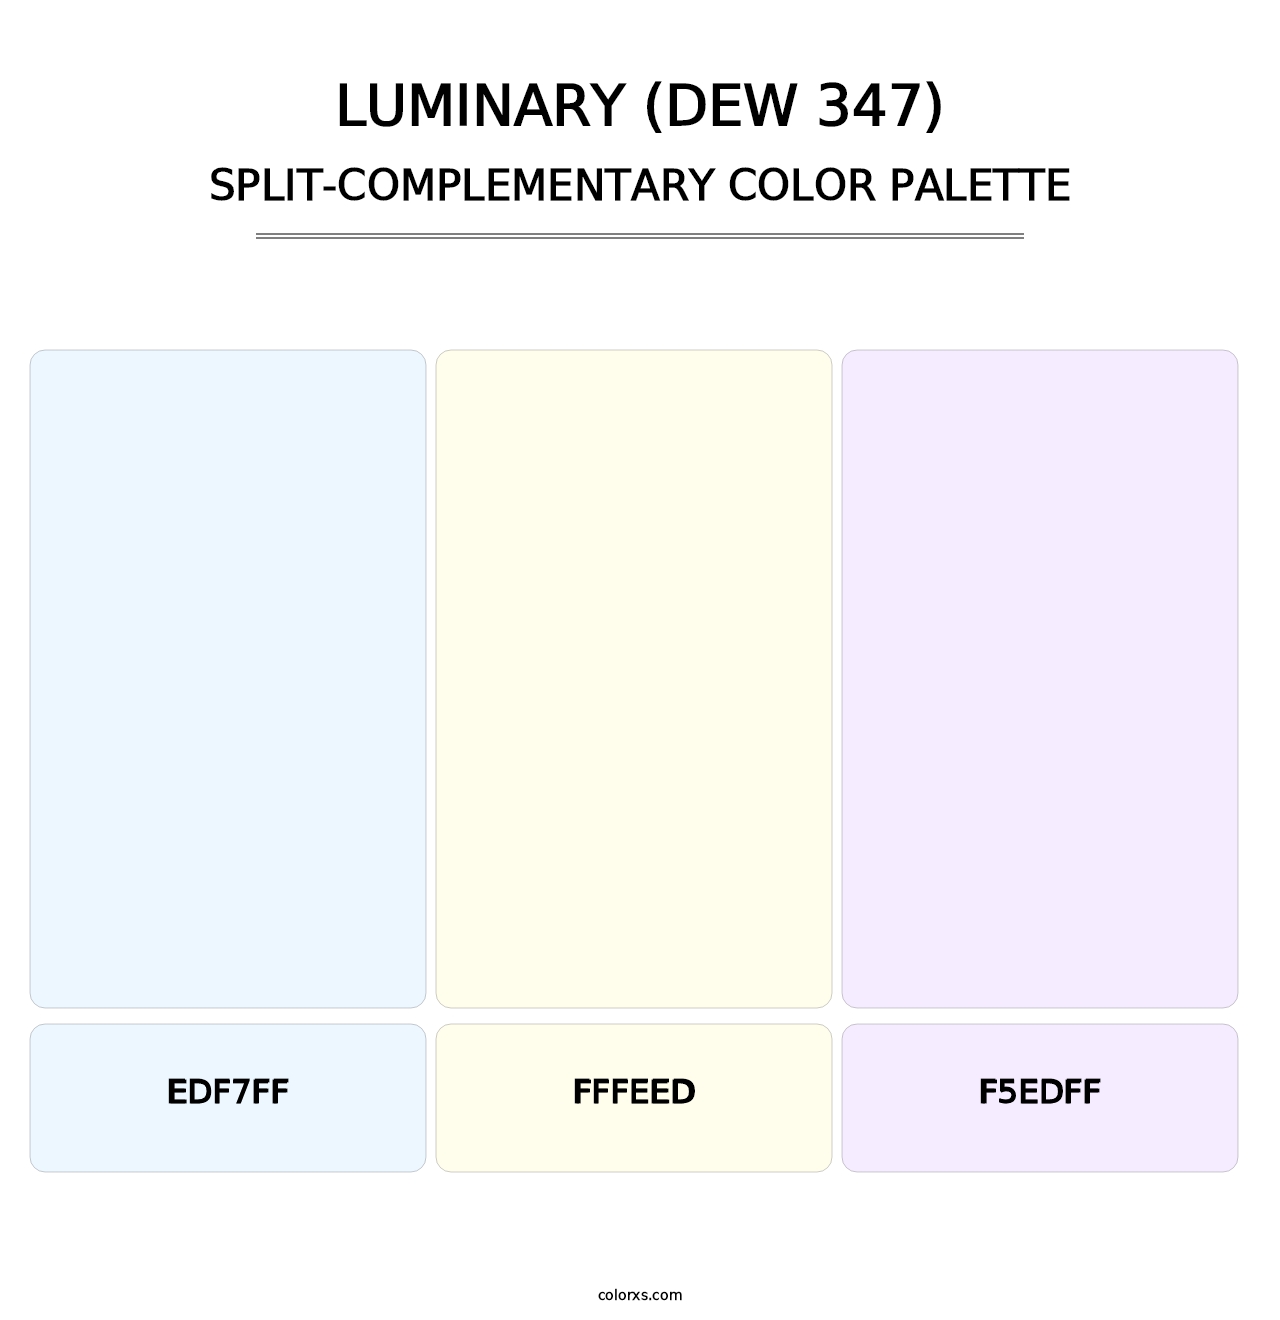 Luminary (DEW 347) - Split-Complementary Color Palette